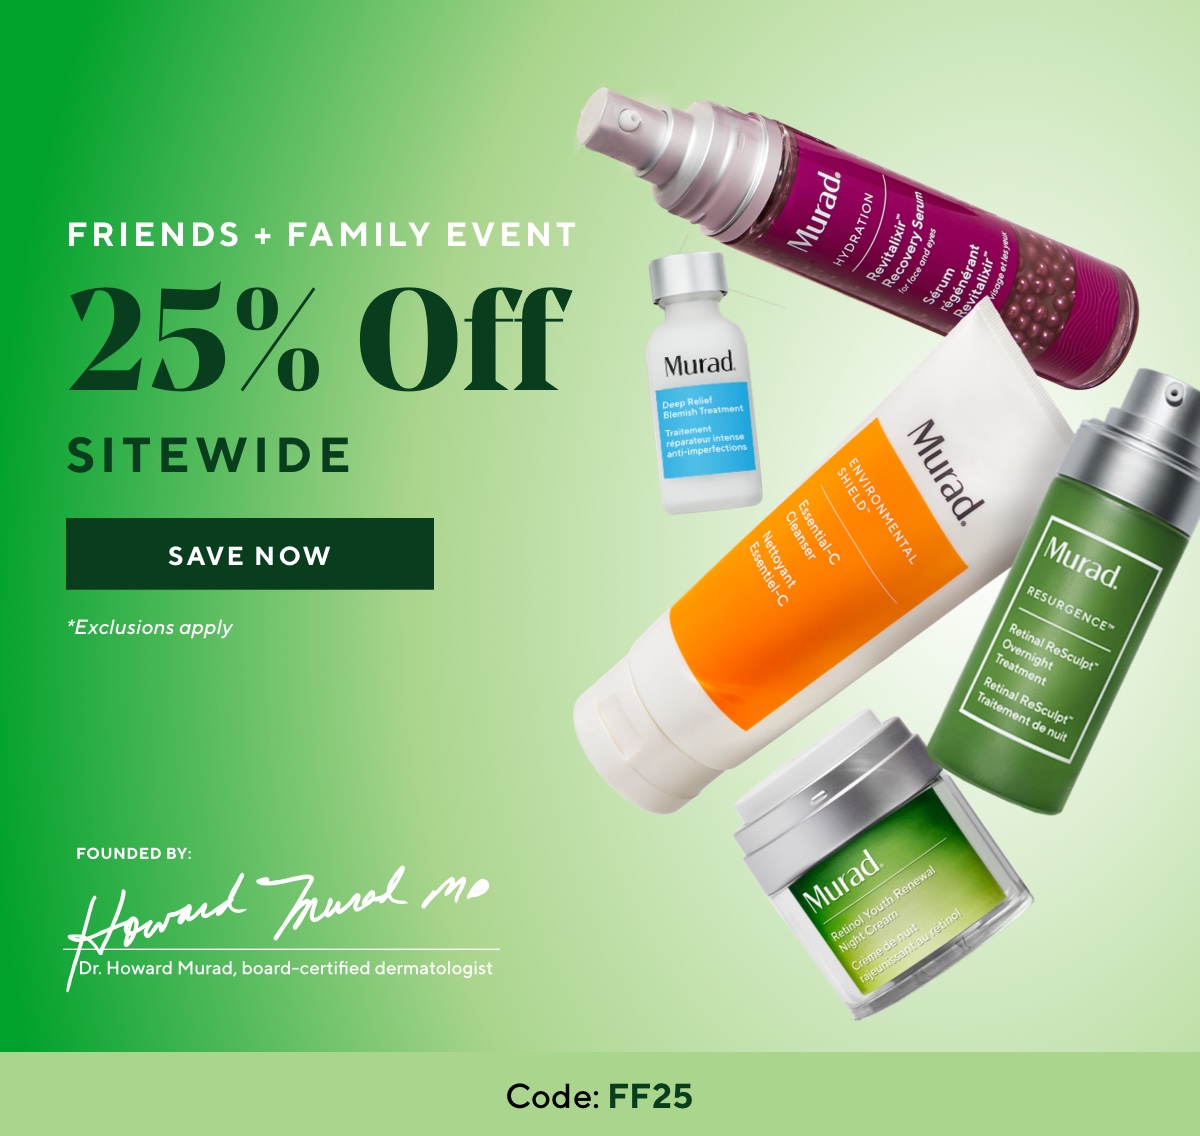 25% off sitewide at Murad